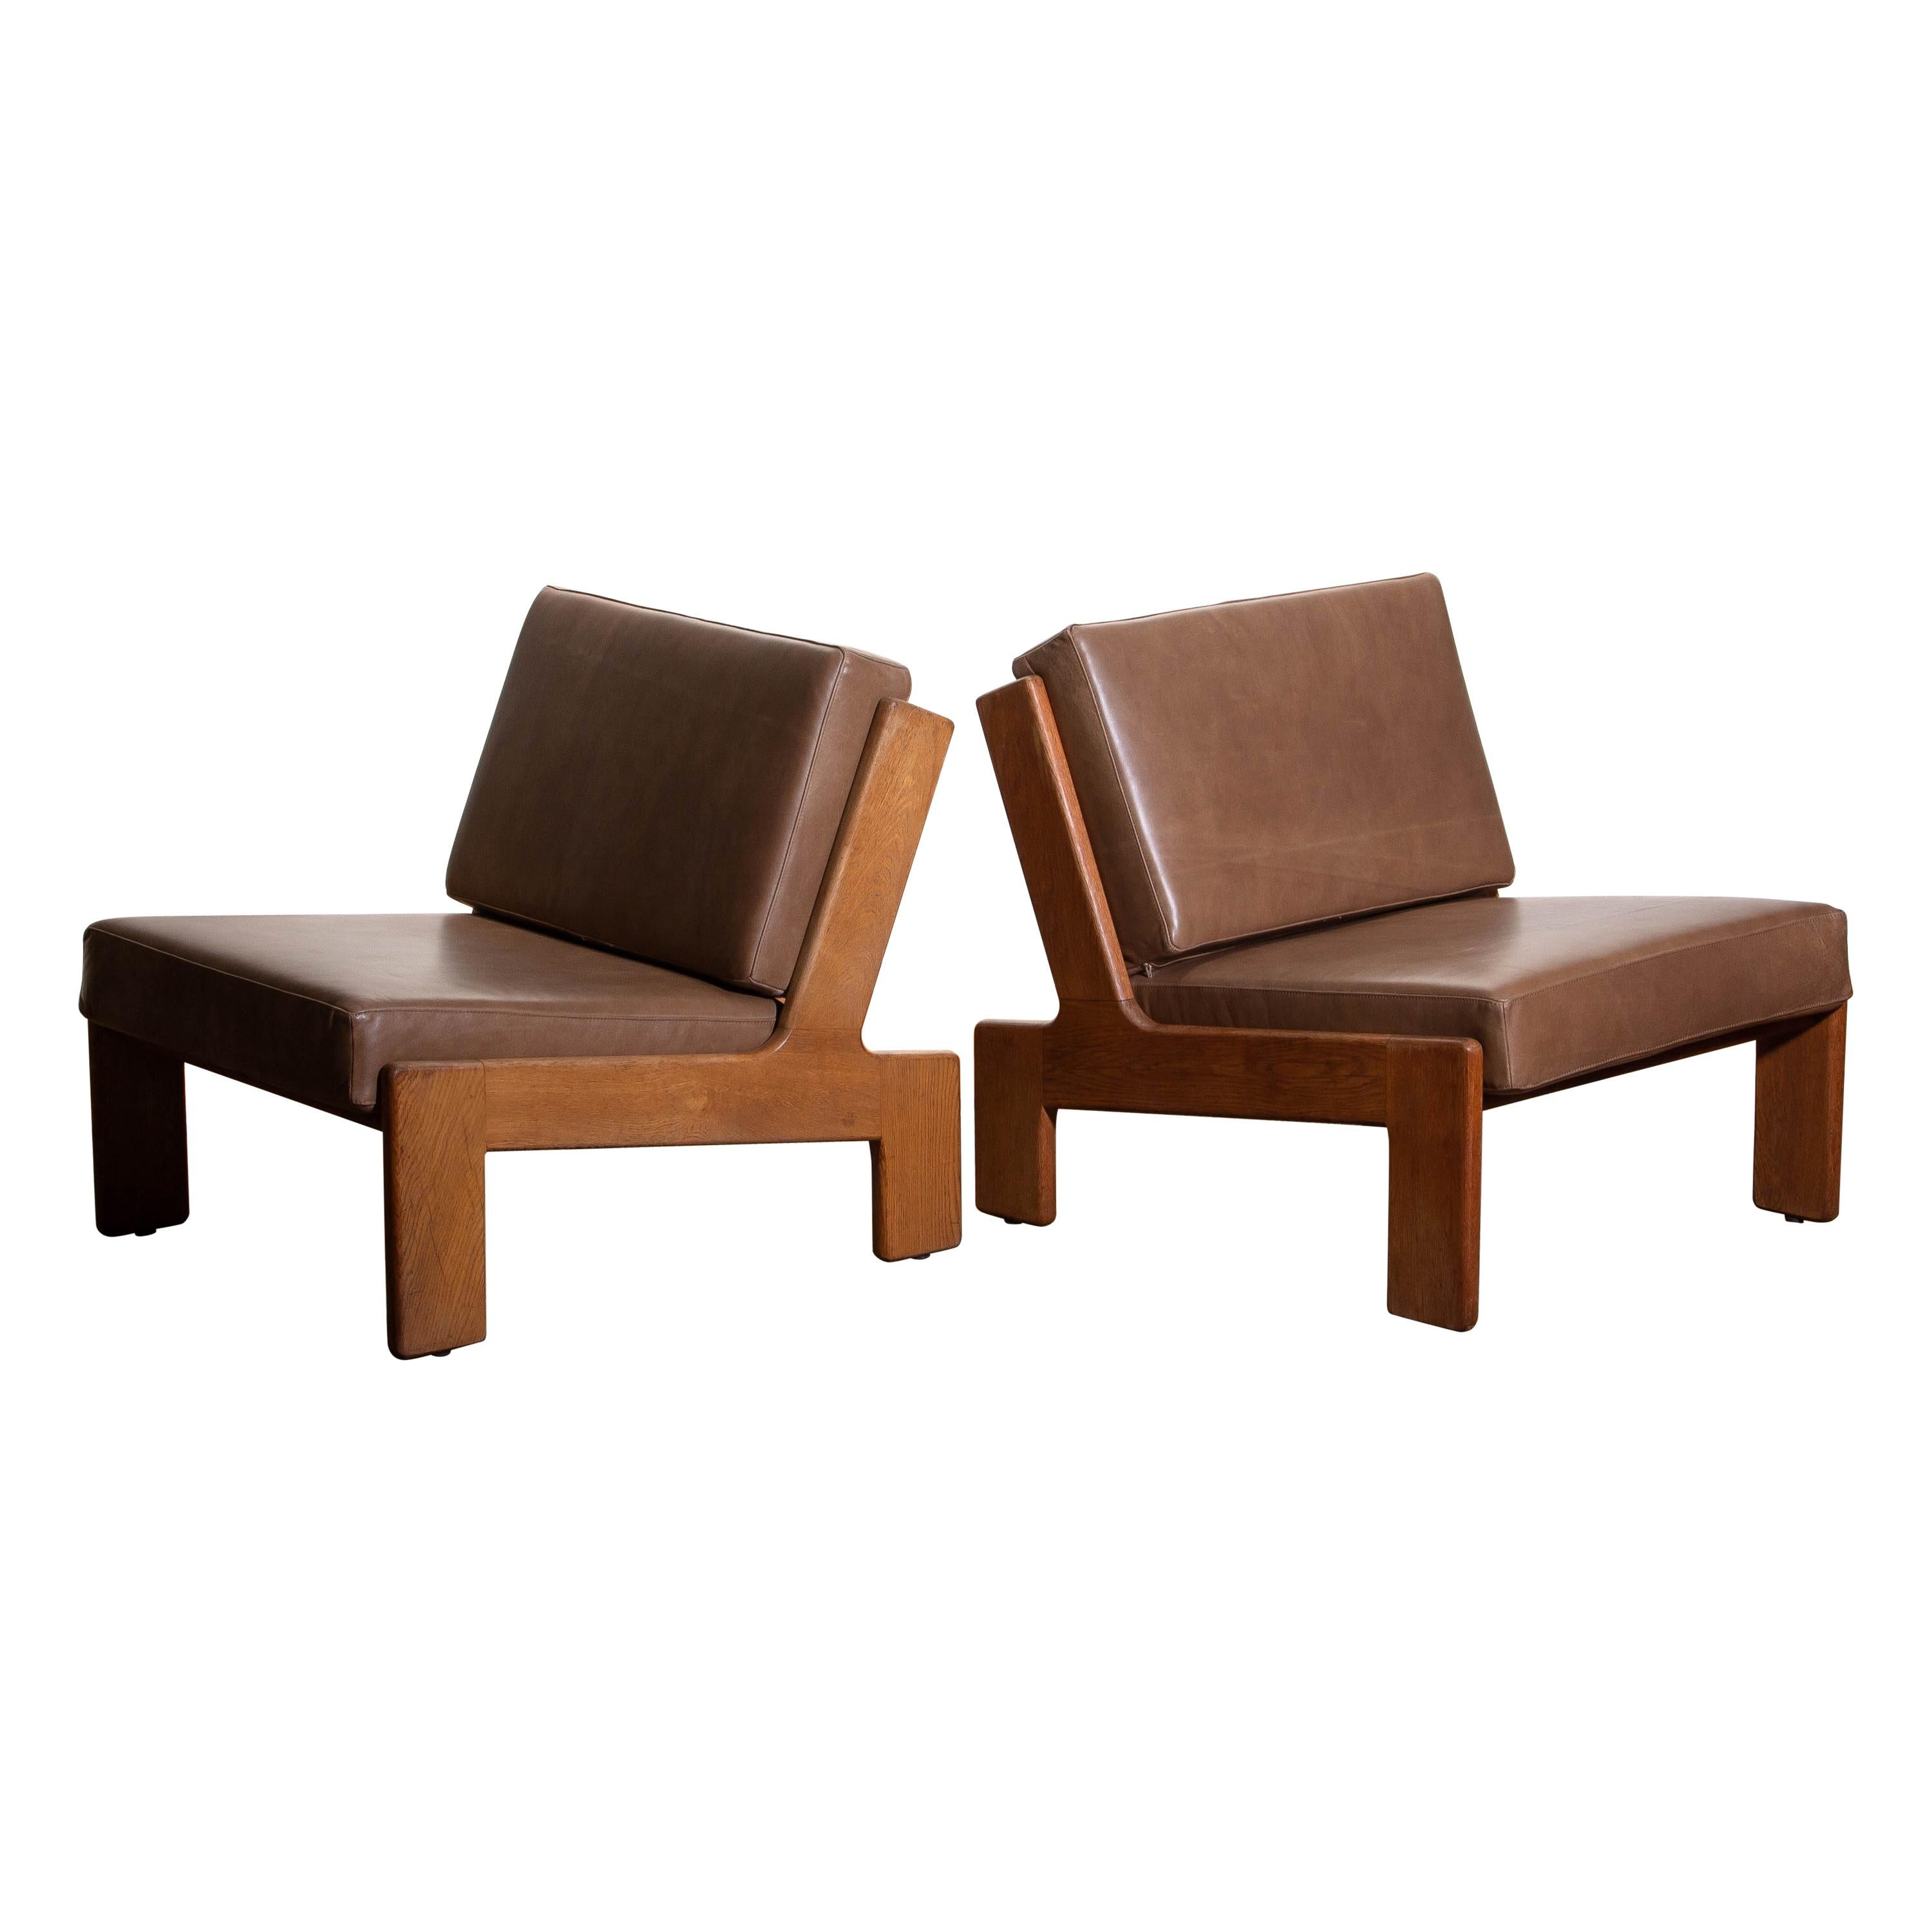 Mid-20th Century 1960, Pair of Oak and Leather Cubist Lounge Chairs by Esko Pajamies for Asko